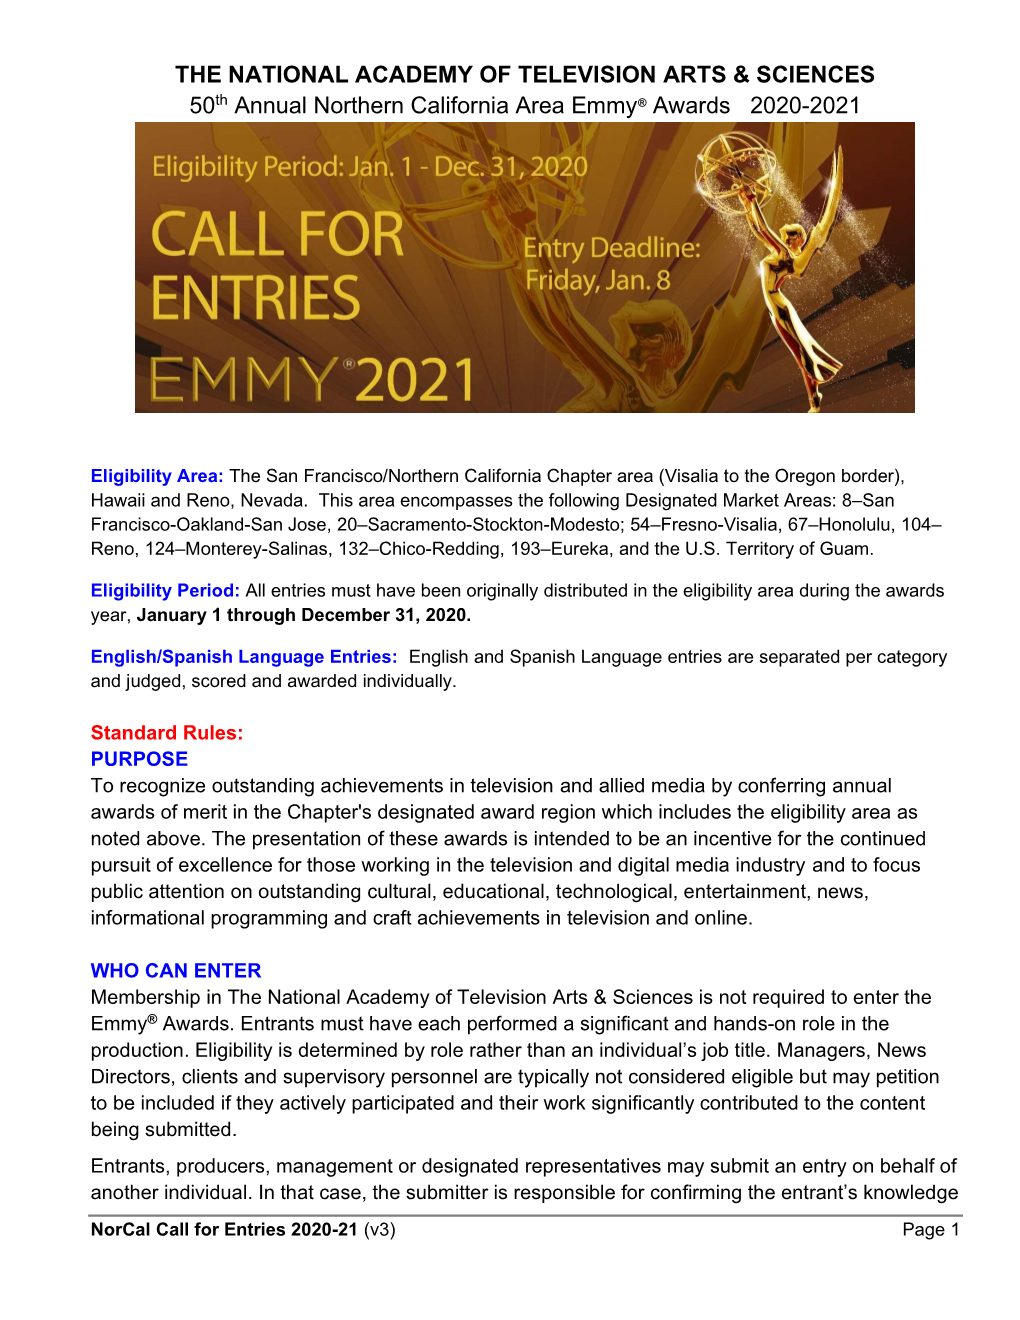 LINK to DOWNLOAD CALL for ENTRIES (All)